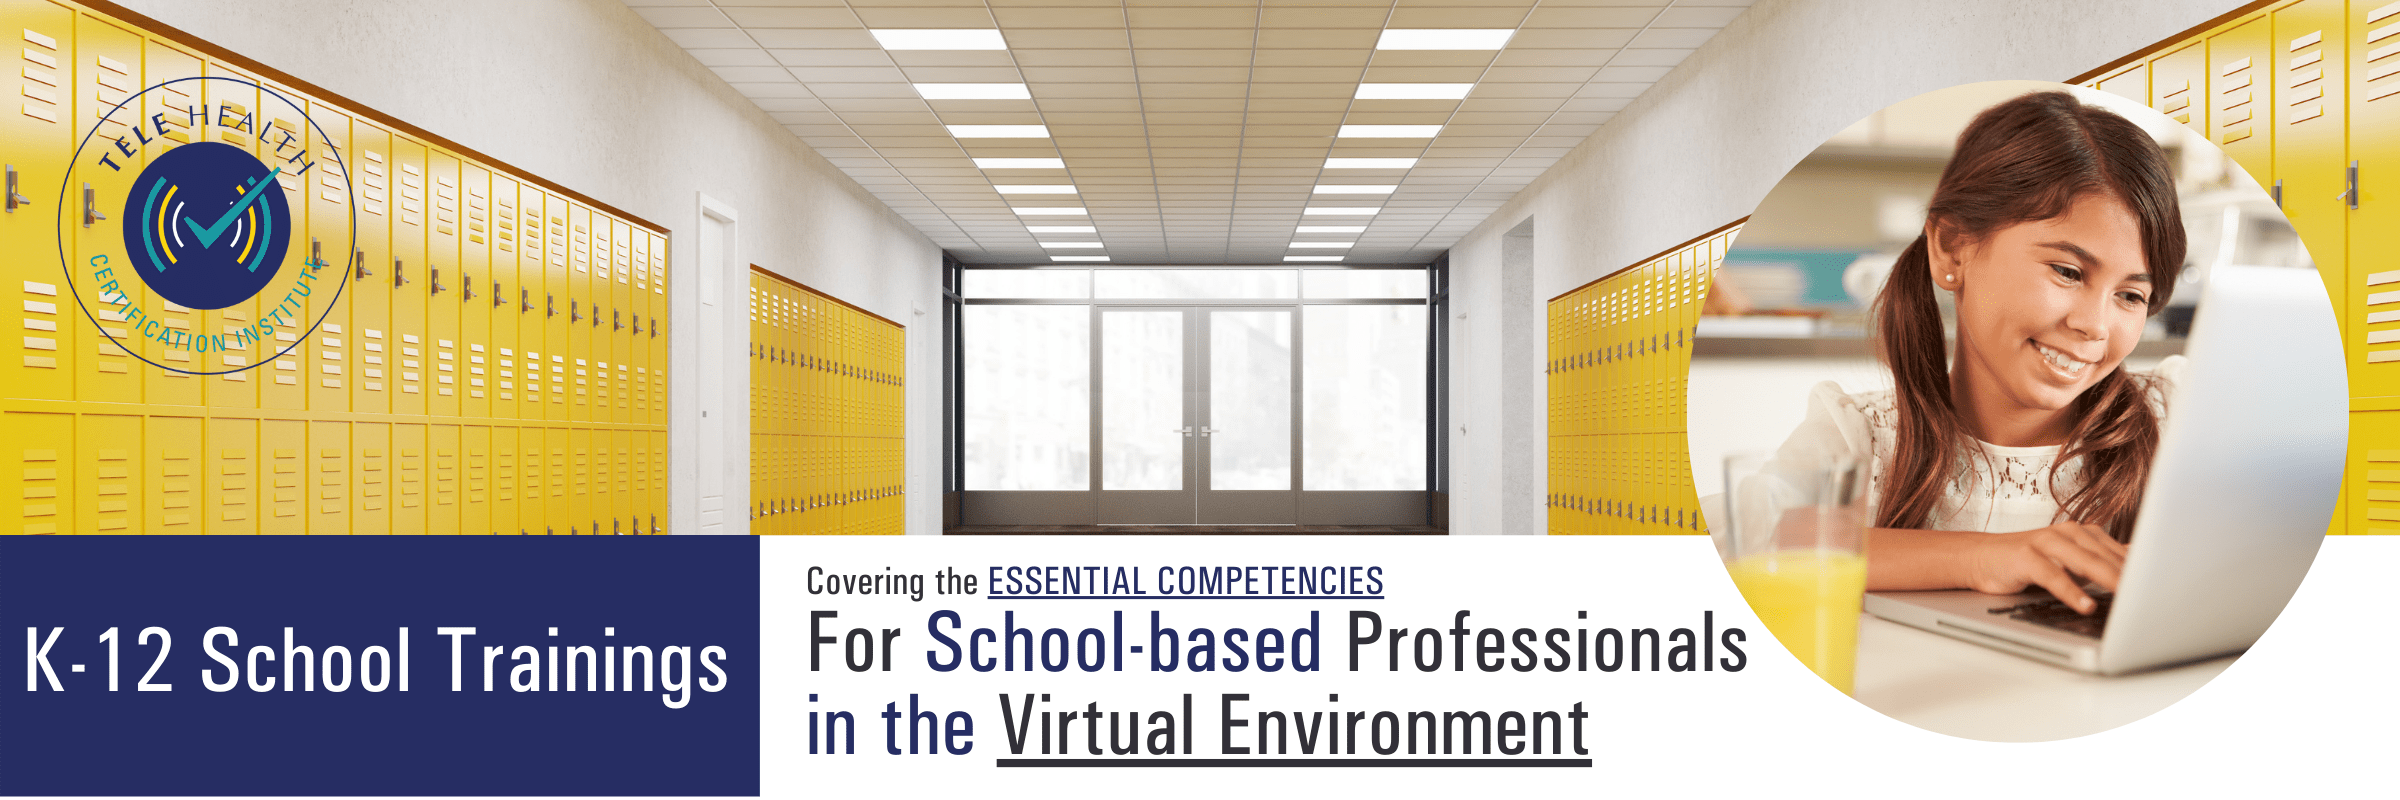 School hallway with yellow lockers, K-12 training for the virtual enviornment